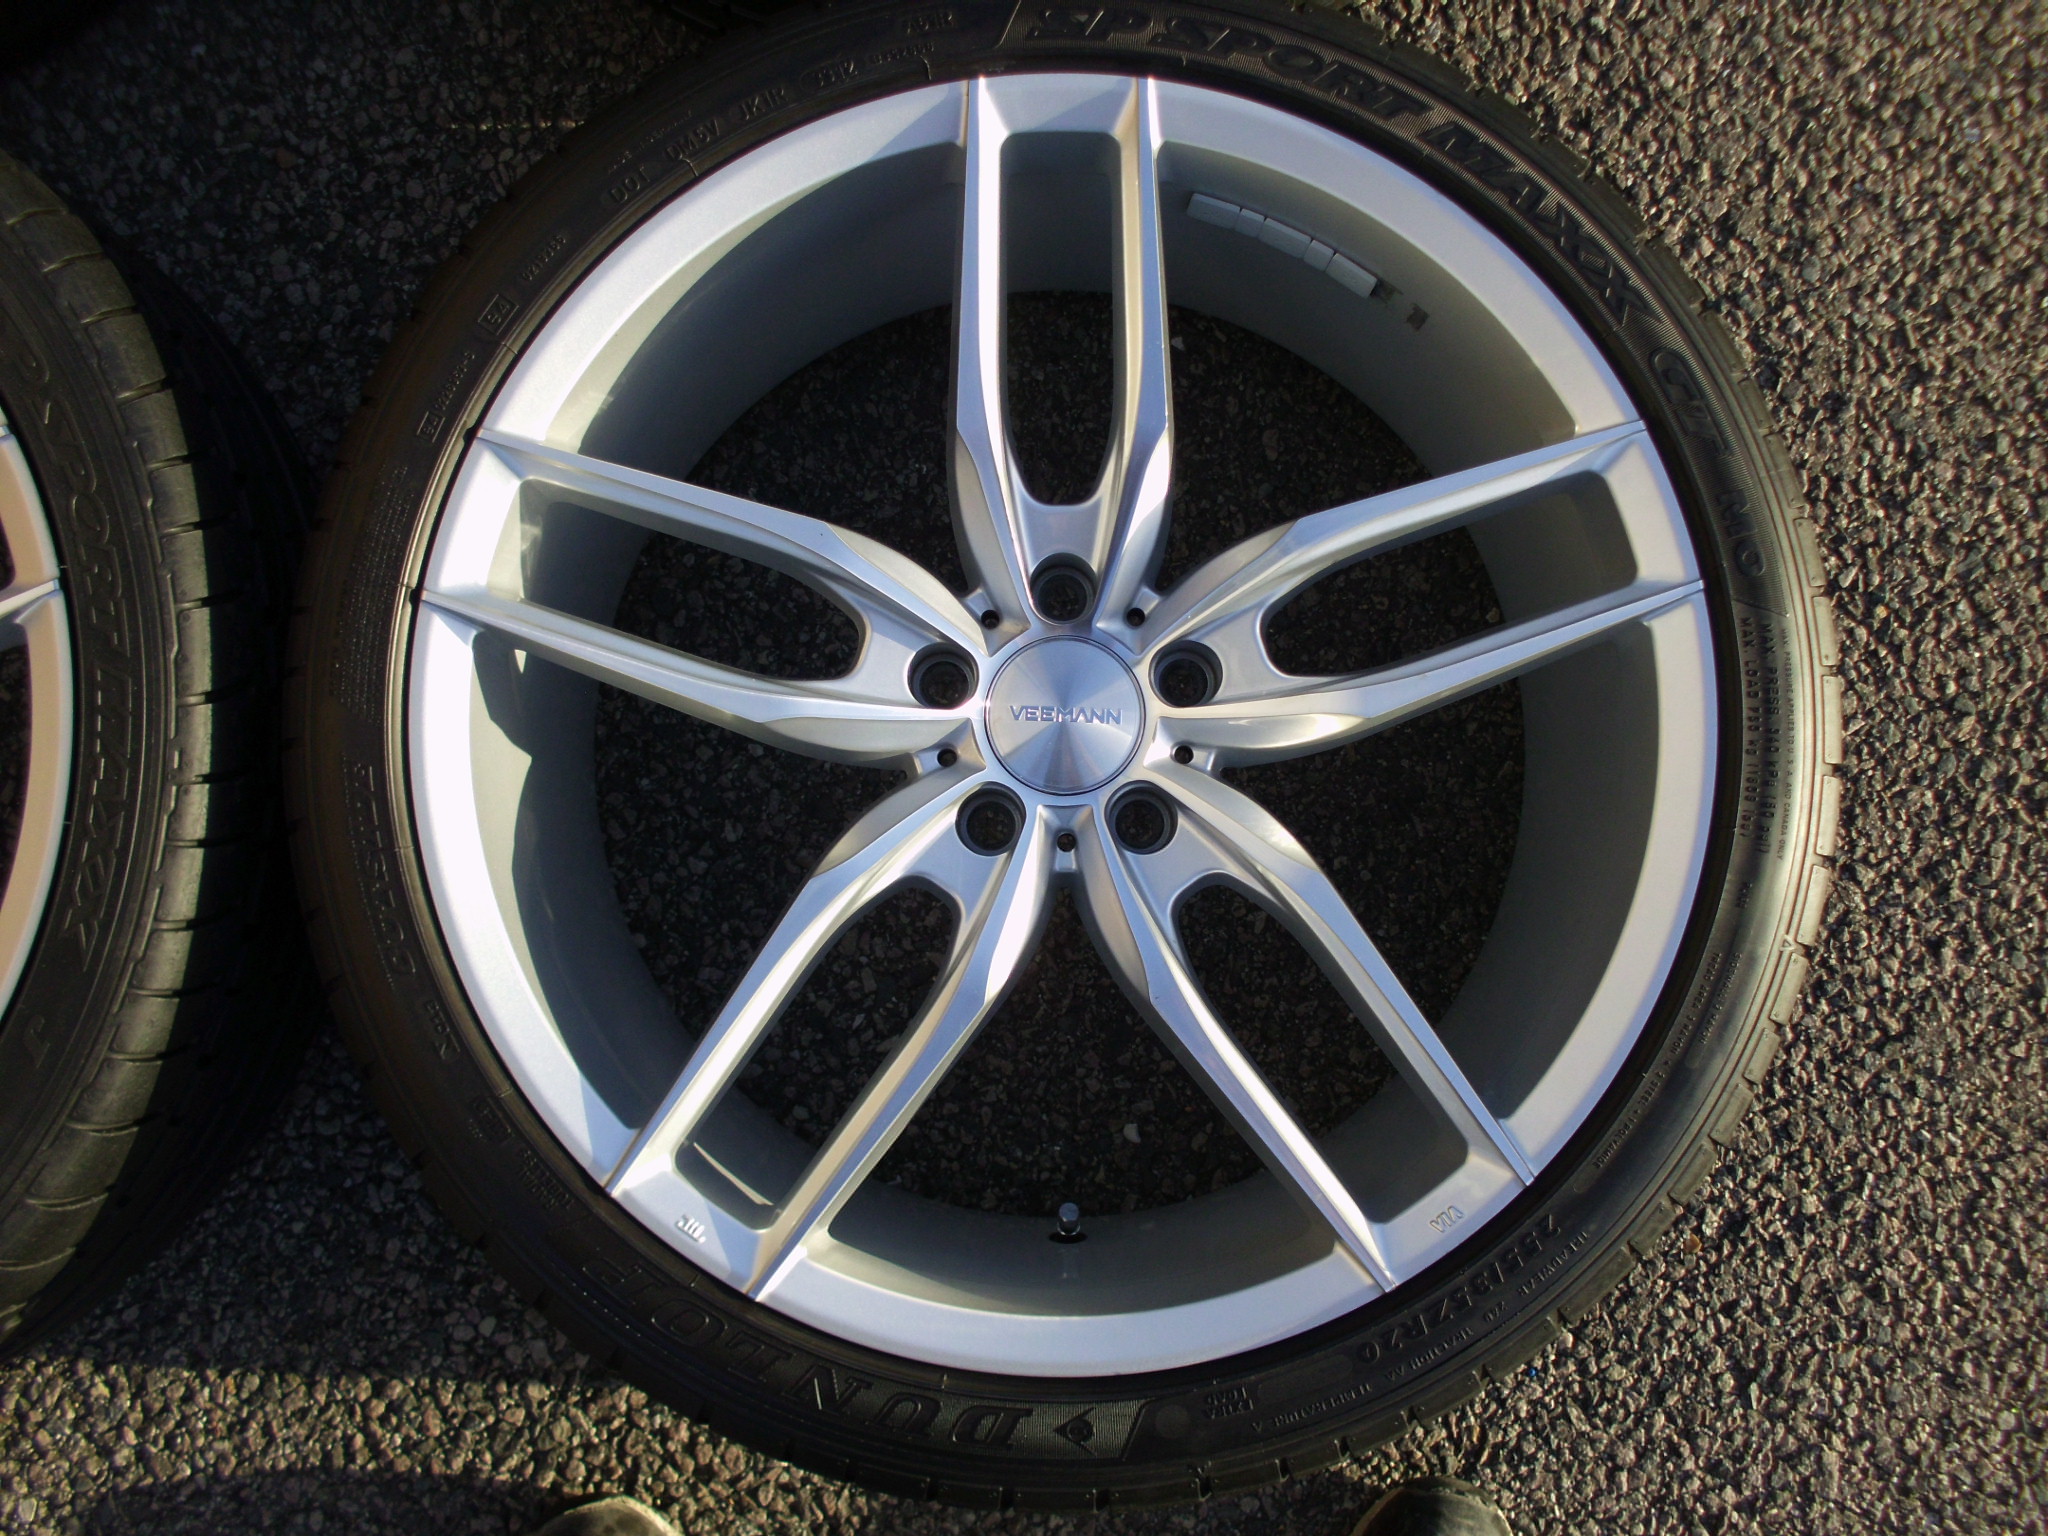 USED 20" VEEMANN V-FS28 ALLOY WHEELS IN SILVER WITH POLISHED FACE INC PART WORN TYRES et38/et35